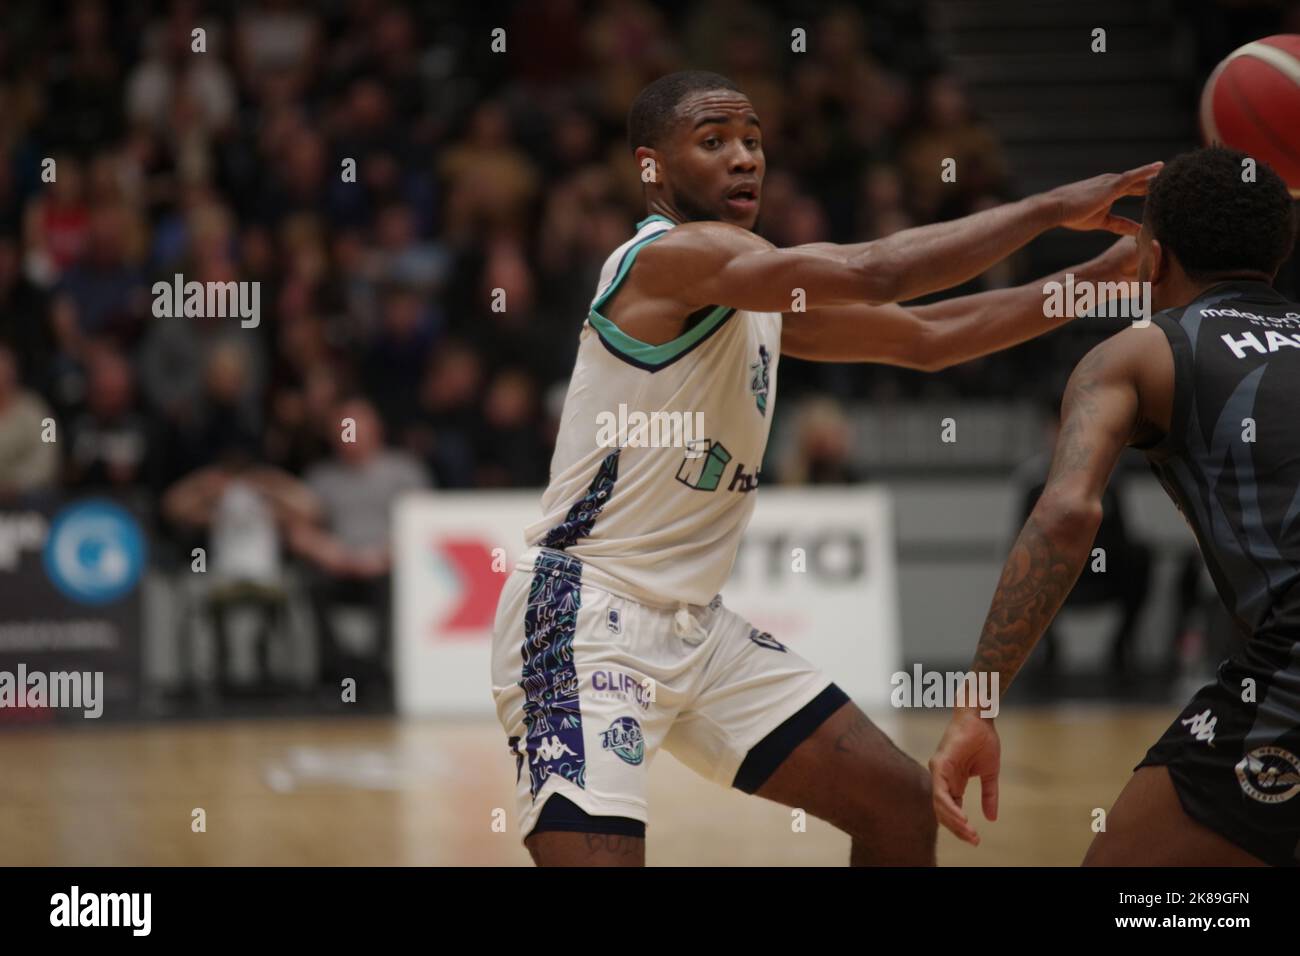 Newcastle, England, 7 October 2022. Jelani Watson-Gayle playing for Bristol Flyers in a BBL Championship match against Newcastle Eagles at the Vertu Motors Arena. Credit: Colin Edwards/Alamy Live News. Stock Photo